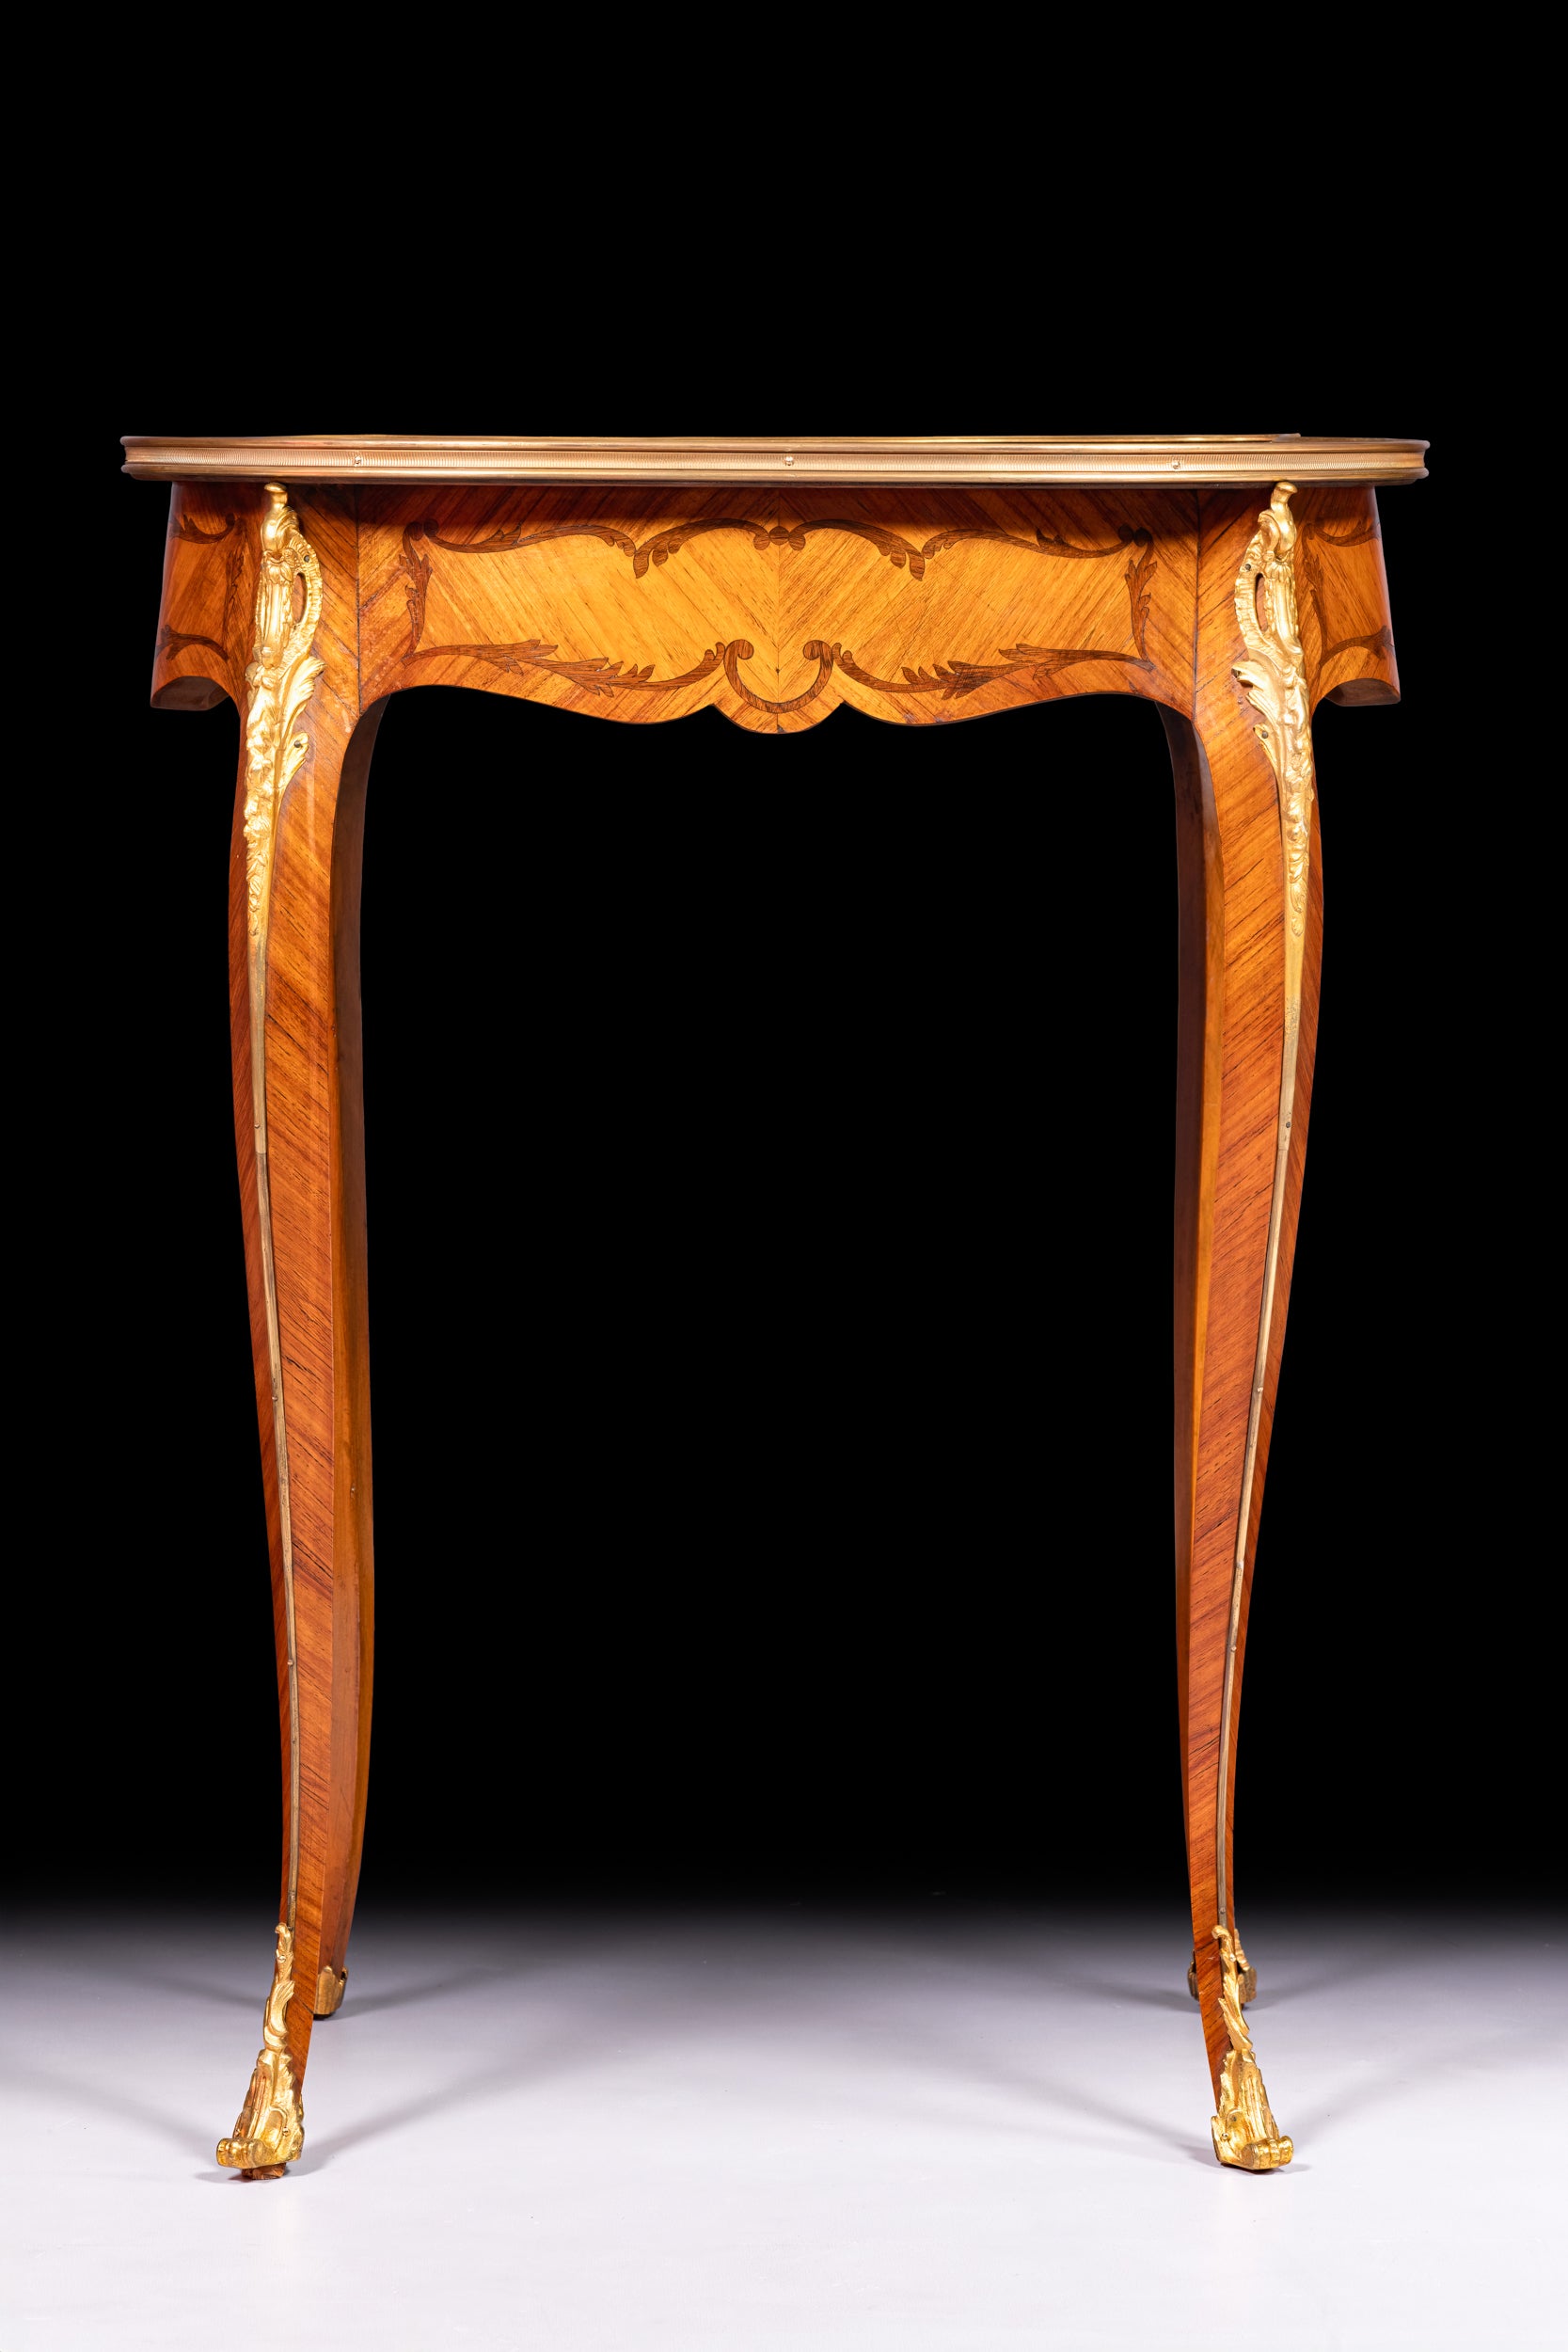 19TH CENTURY KIDNEY SHAPED TABLE - REF No. 9066